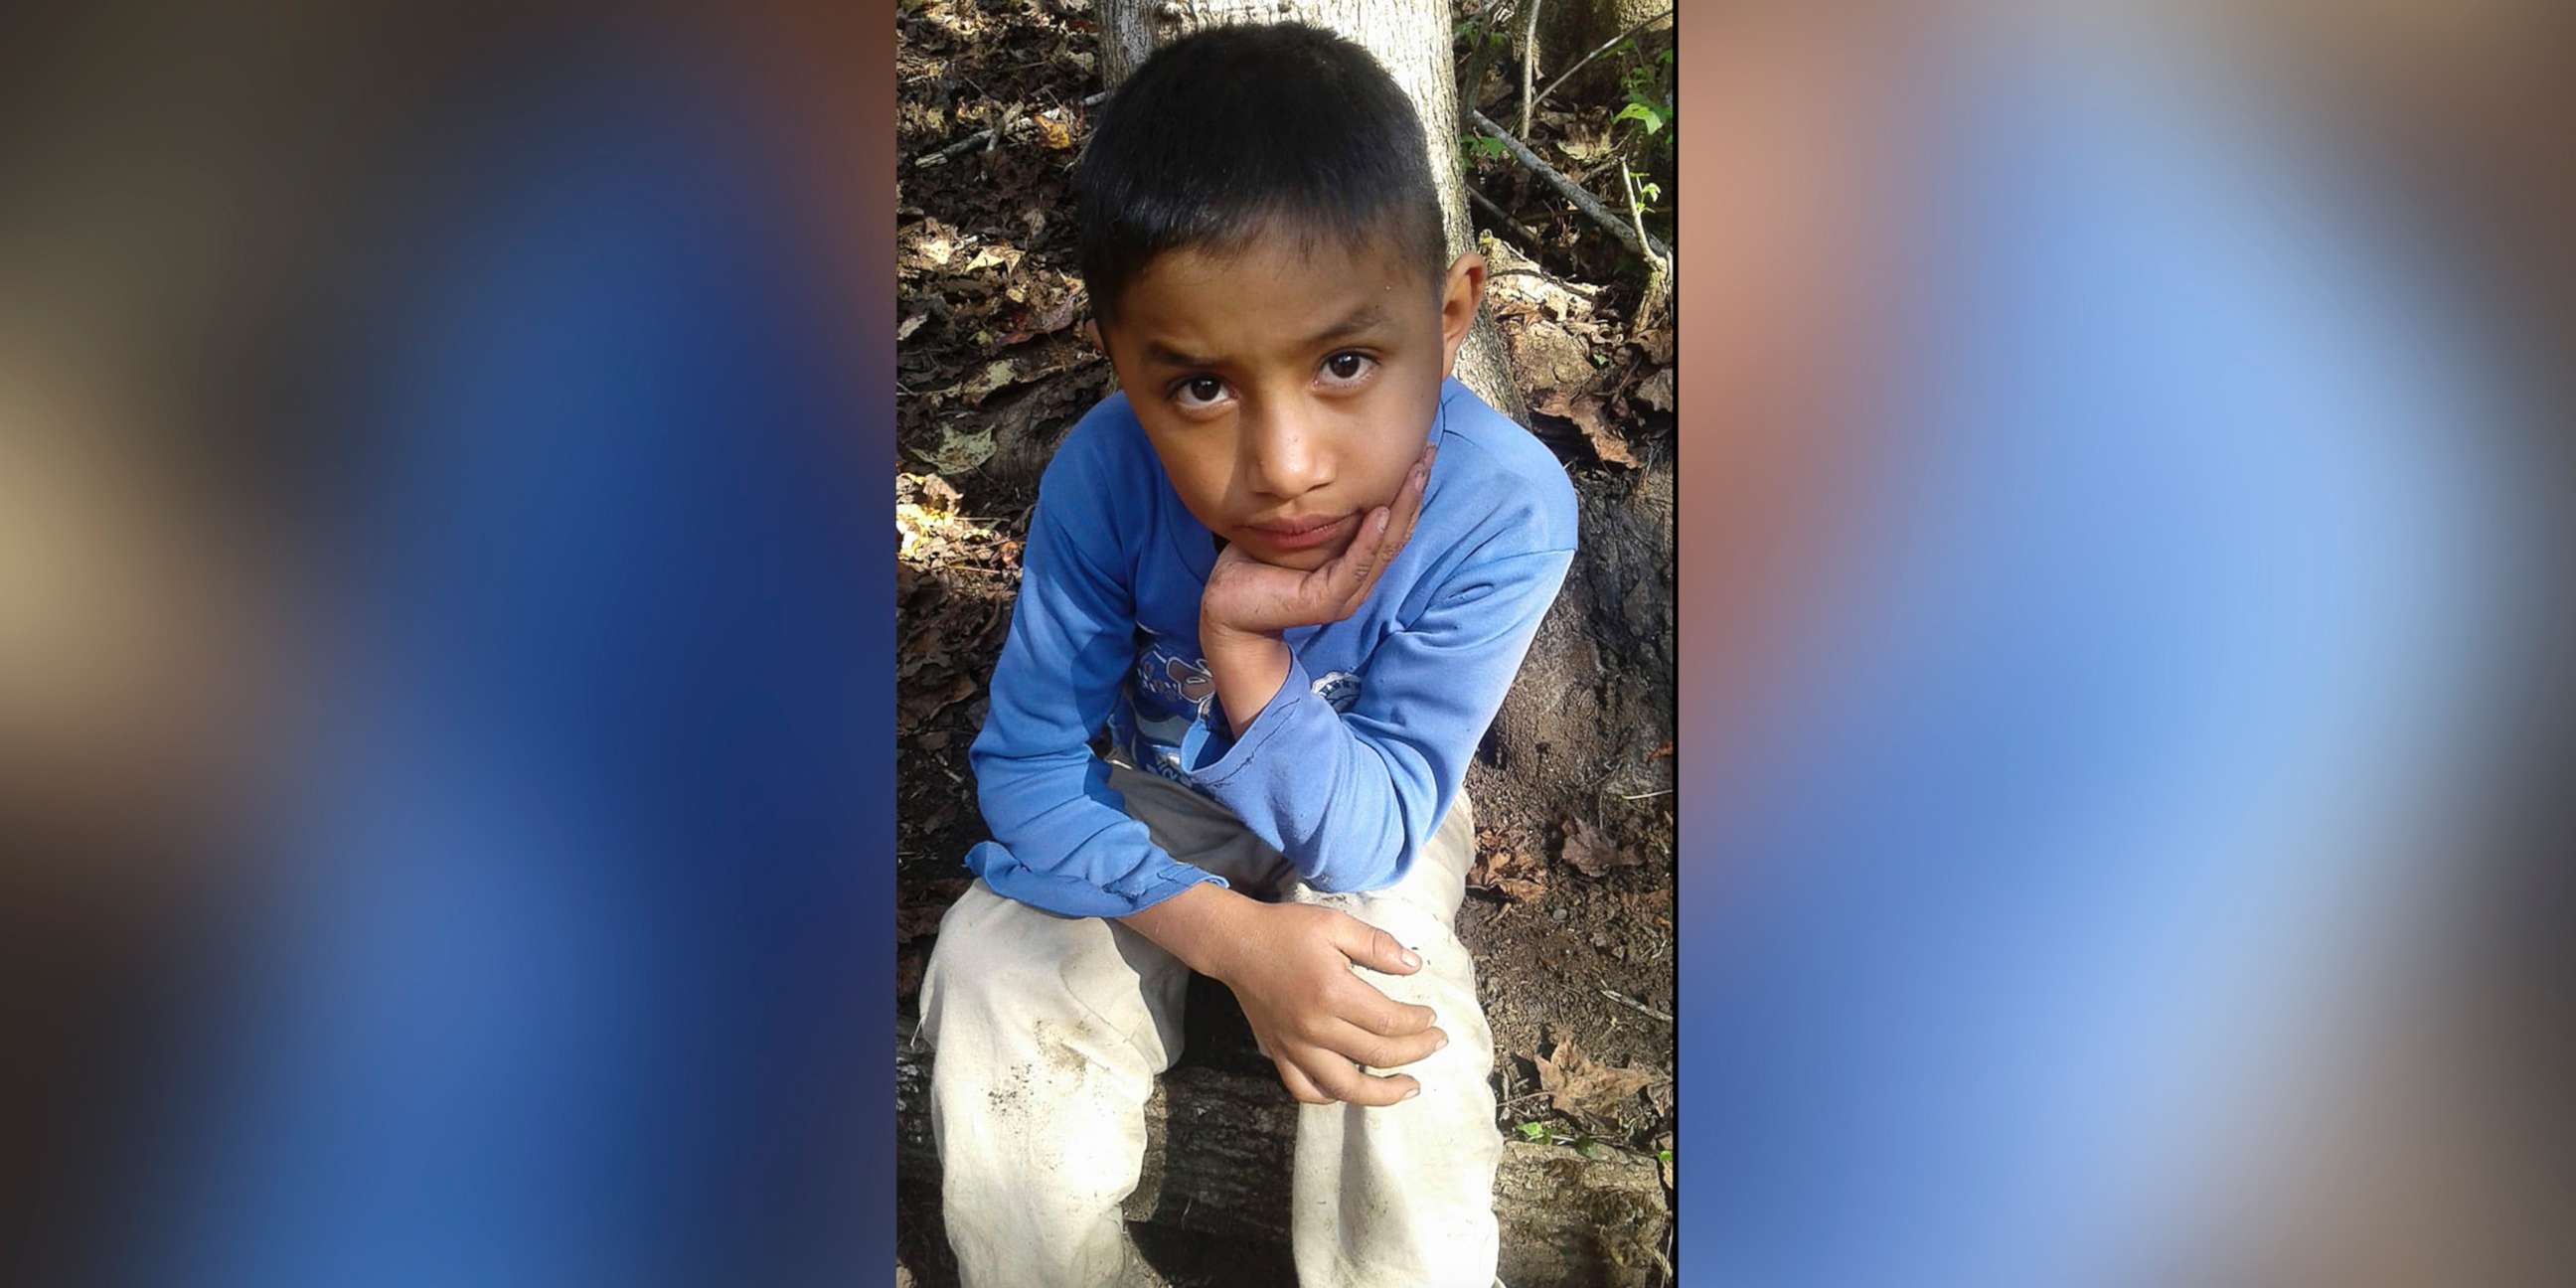 PHOTO: A Dec, 12, 2018 photo provided by Catarina Gomez, shows her half-brother Felipe Gomez Alonzo, 8, in Yalambojoch, Guatemala. The 8-year-old boy died in U.S. custody at a New Mexico hospital on Christmas Eve. The cause is under investigation.